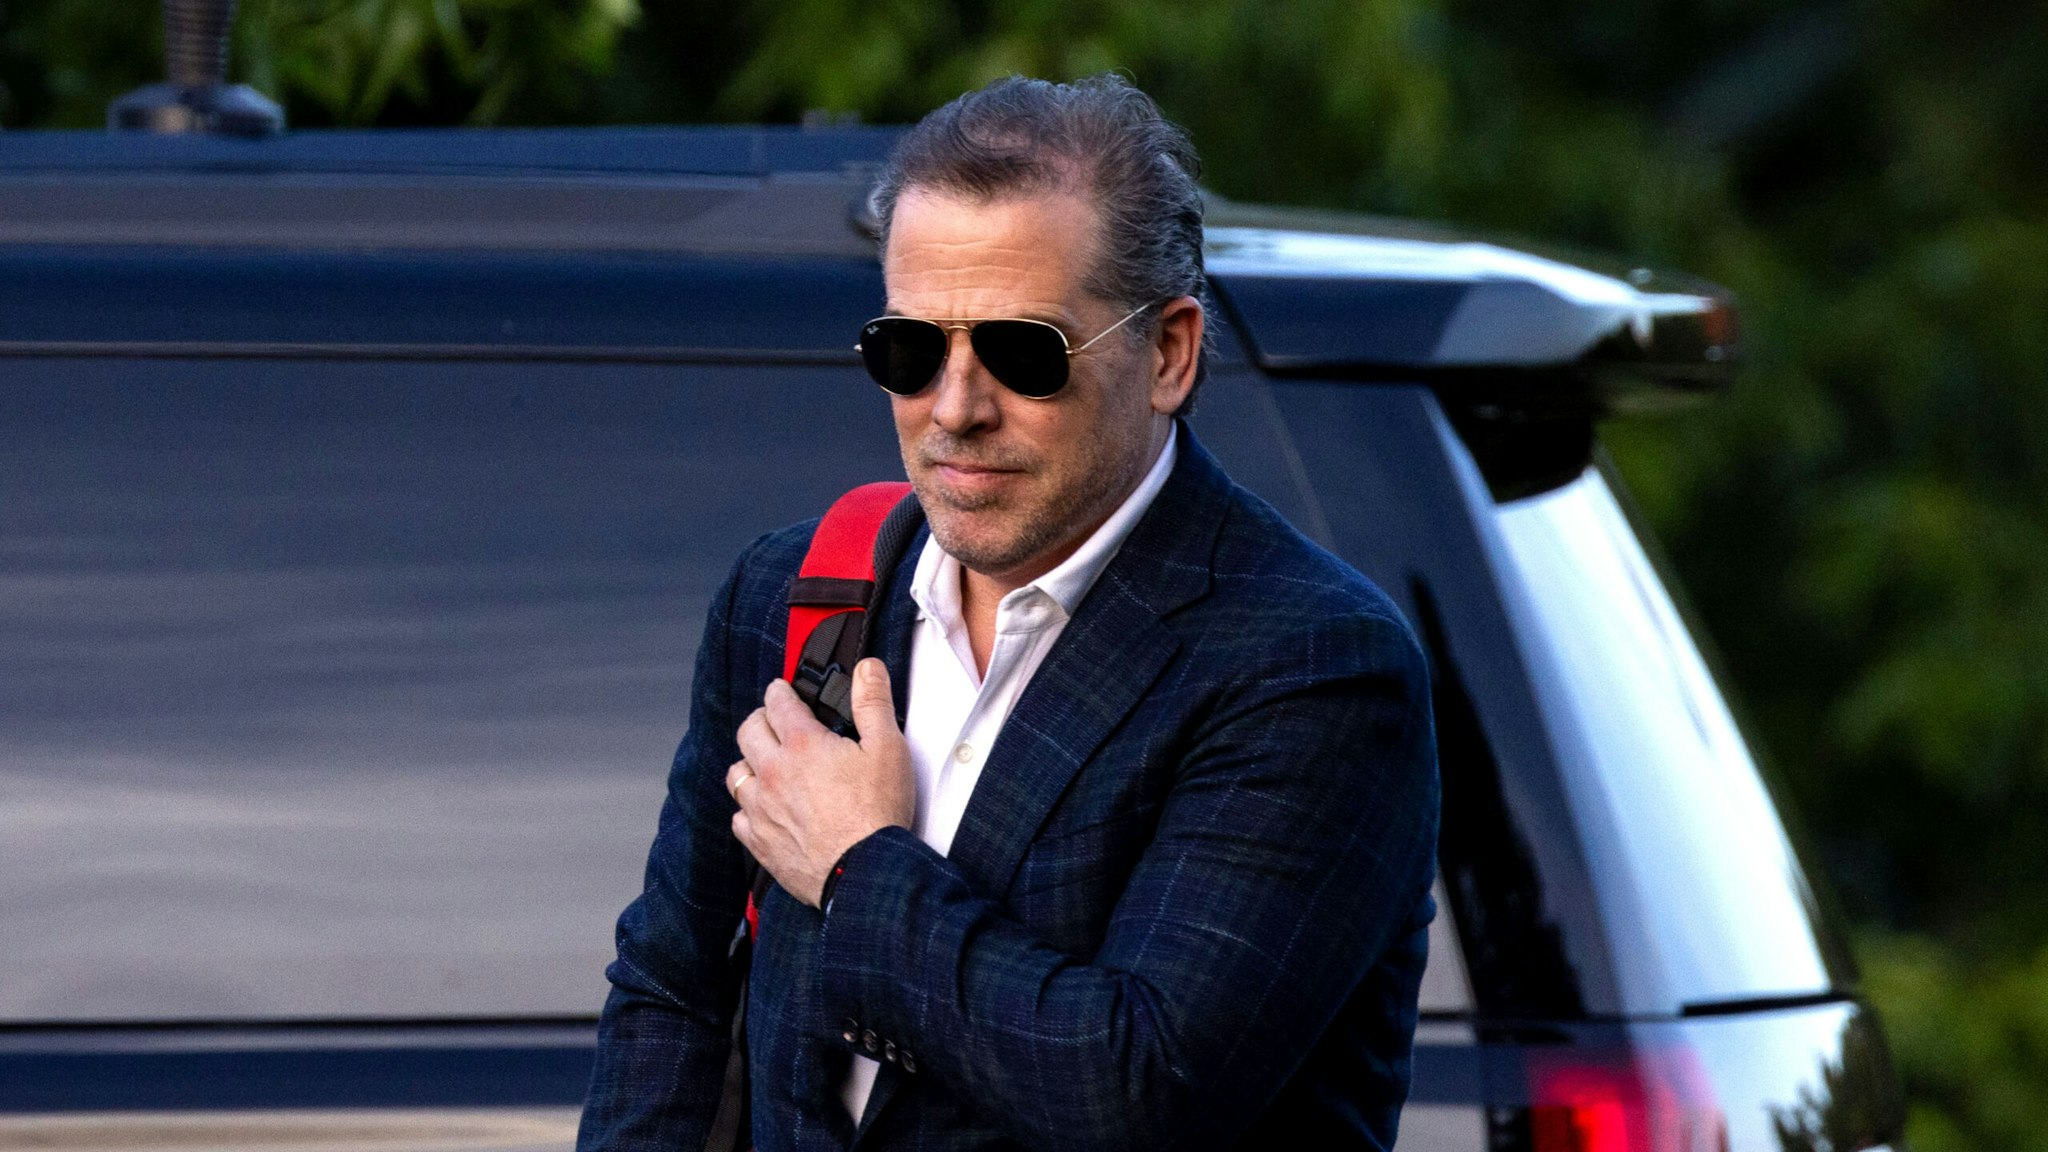 Hunter Biden, son of US President Joe Biden, arrives at Fort Lesley J. McNair in Washington, DC, US, on Sunday, June 25, 2023. President Joe Biden led Republican front-runner Donald Trump in a hypothetical 2024 election rematch in an NBC News poll, though his edge is within the survey's margin of error.